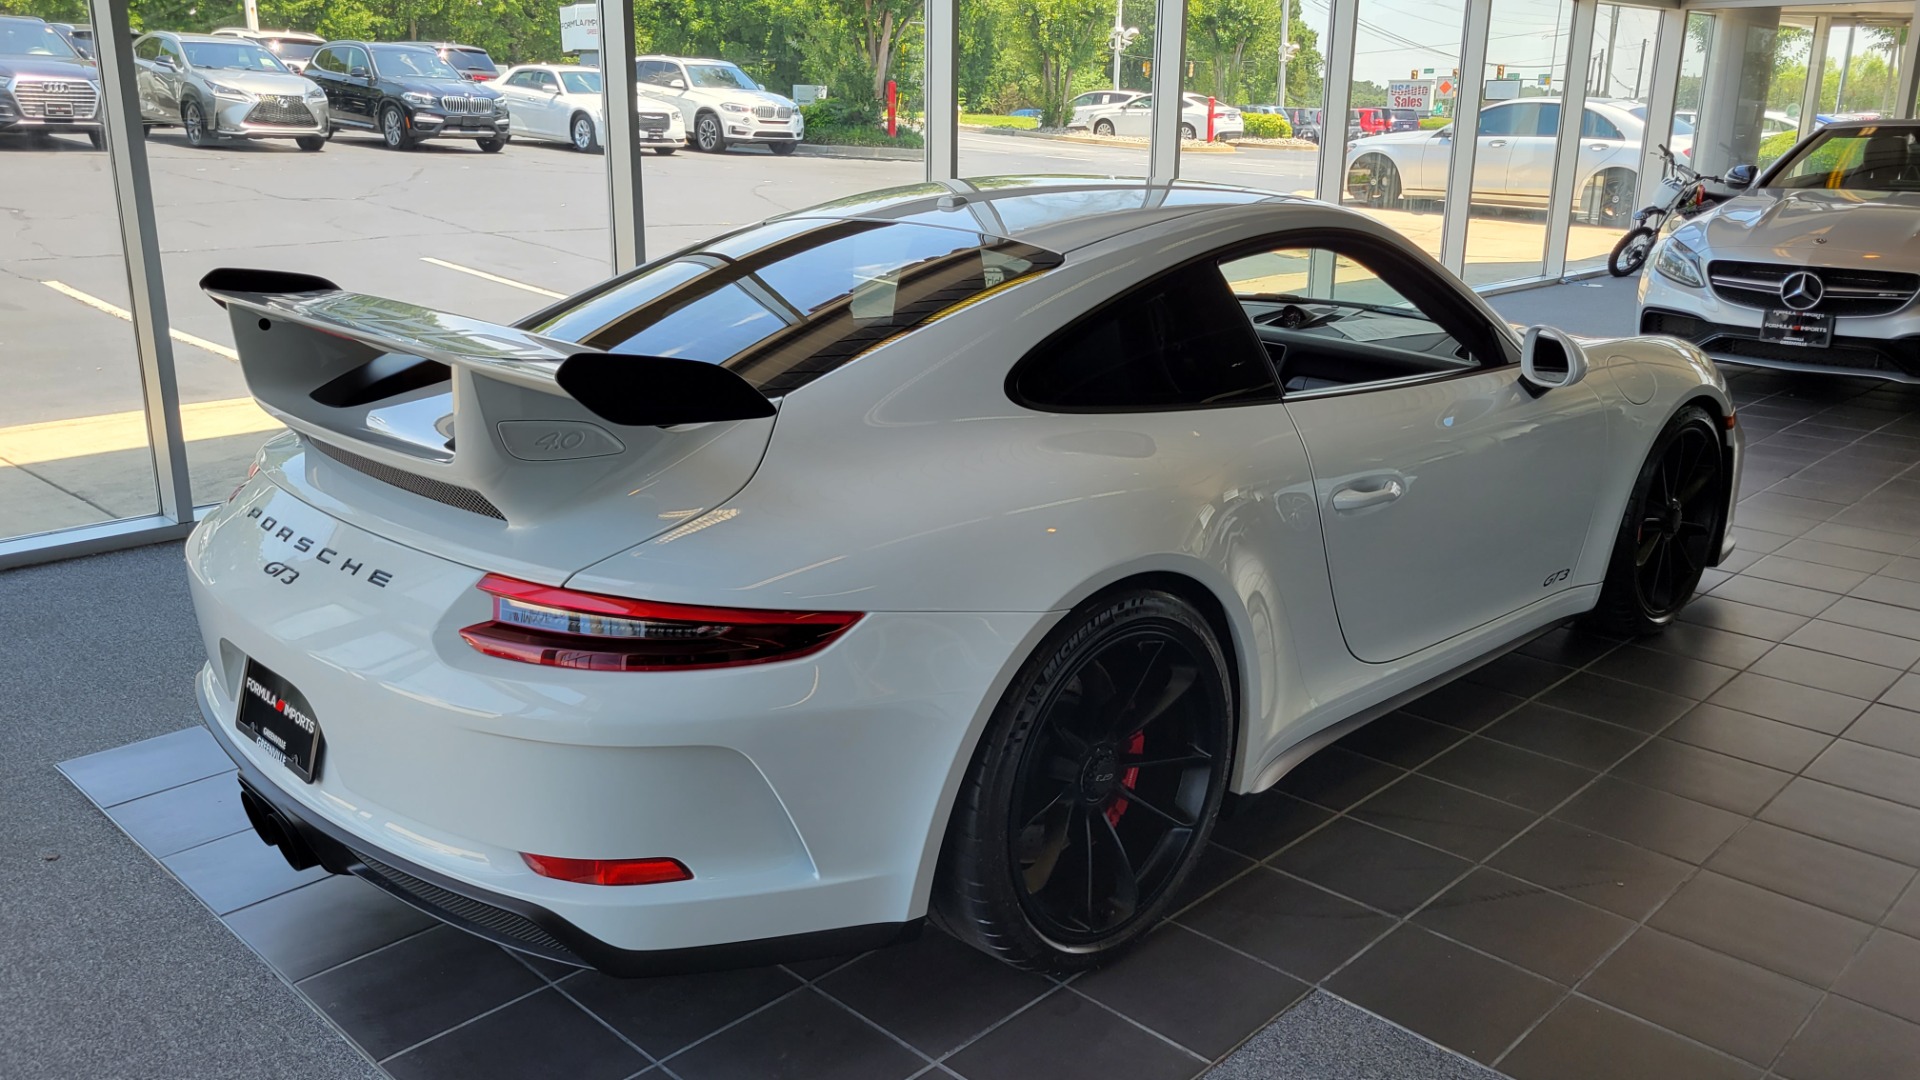 Used 2019 Porsche 911 GT3 4.0L 520HP COUPE / PDK 7-SPD / BOSE / APPLE / REARVIEW for sale $203,995 at Formula Imports in Charlotte NC 28227 3